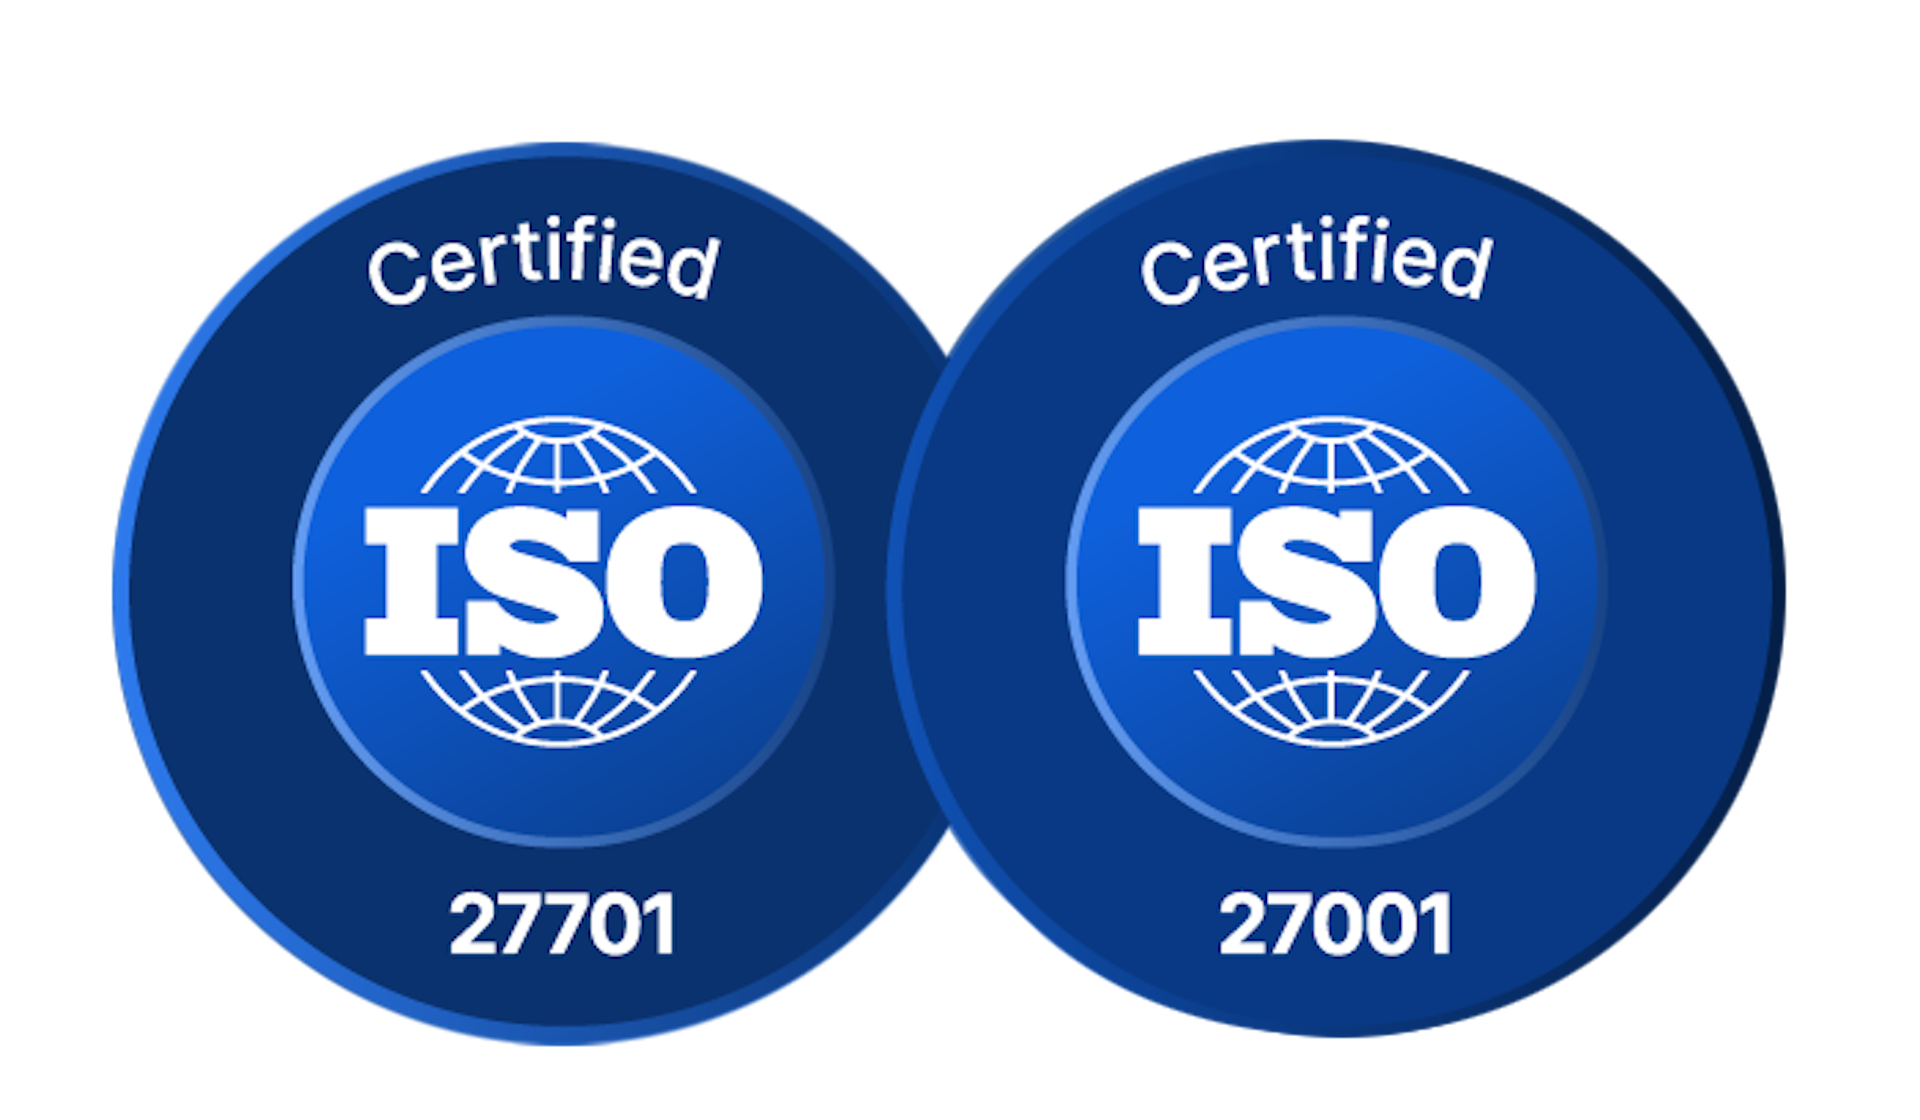 ISO 27701 and 27001 certifications